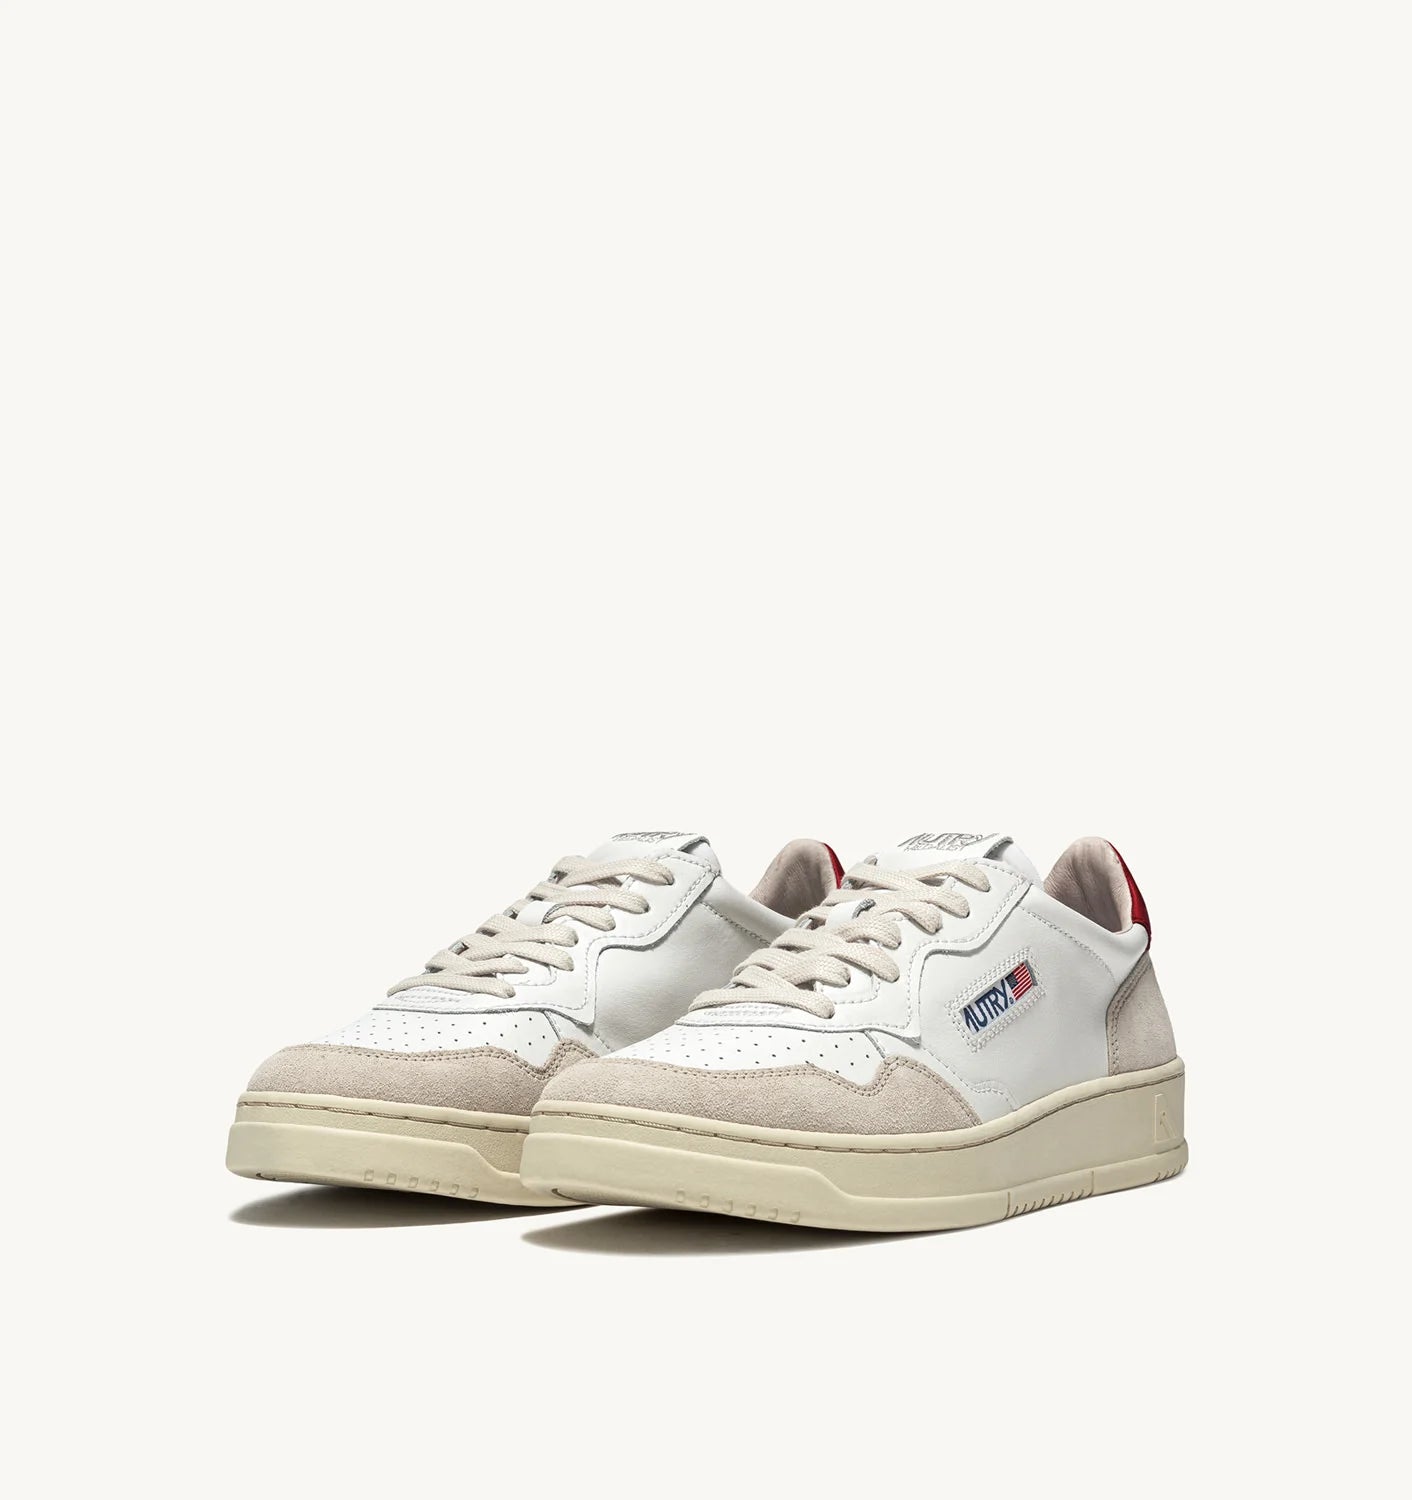 Medalist Low Sneakers In Suede And Leather Color White And Red